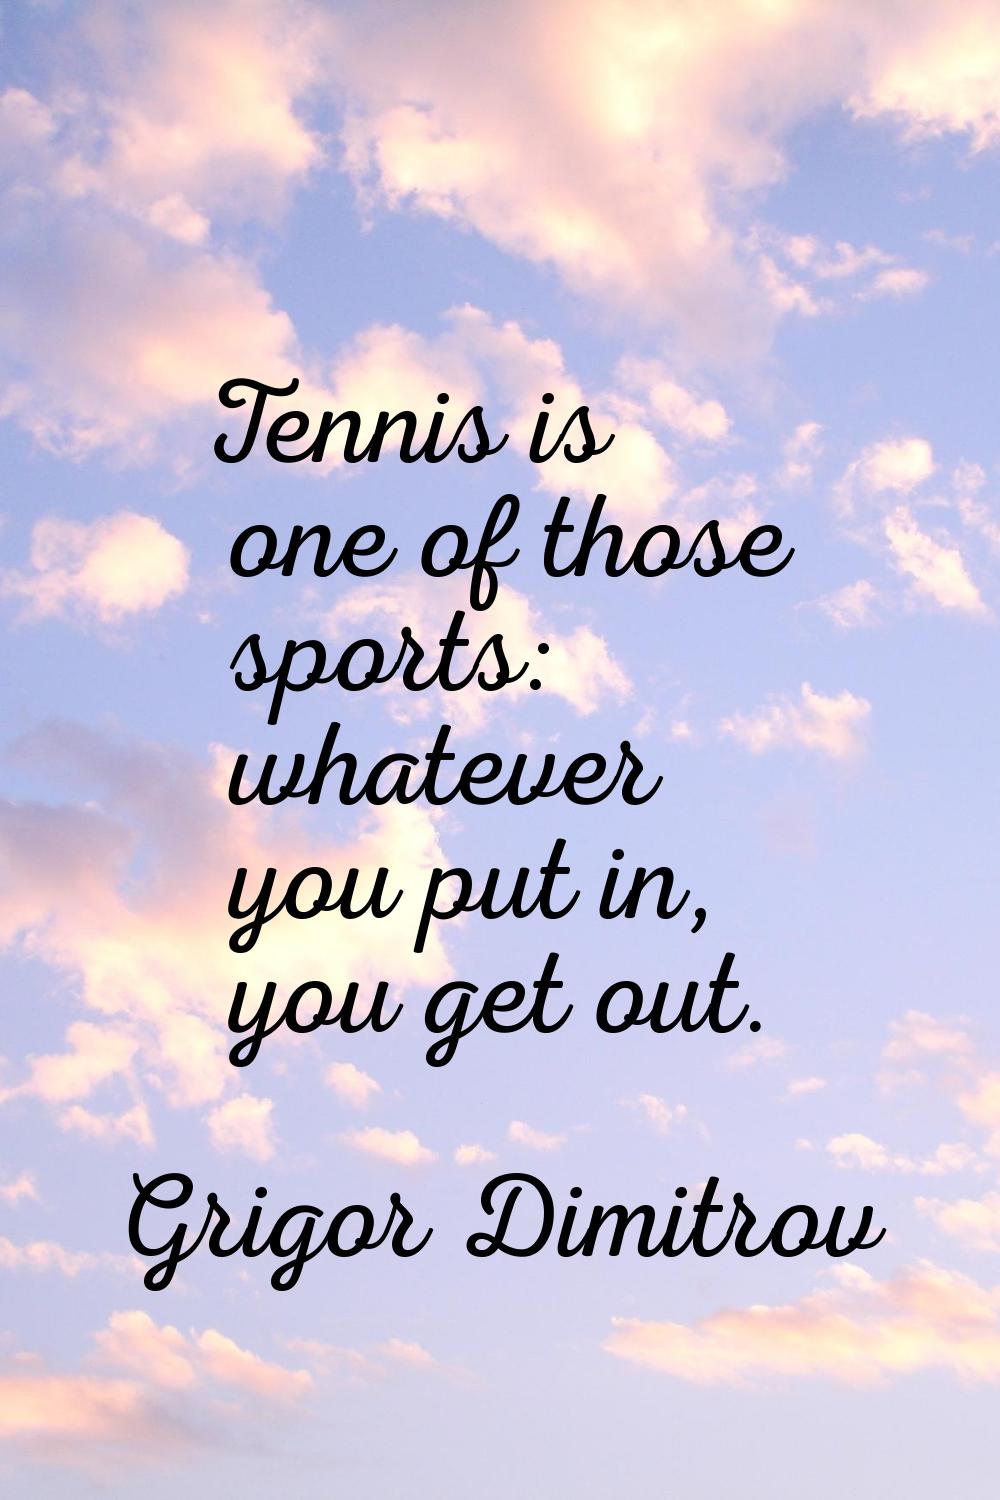 Tennis is one of those sports: whatever you put in, you get out.